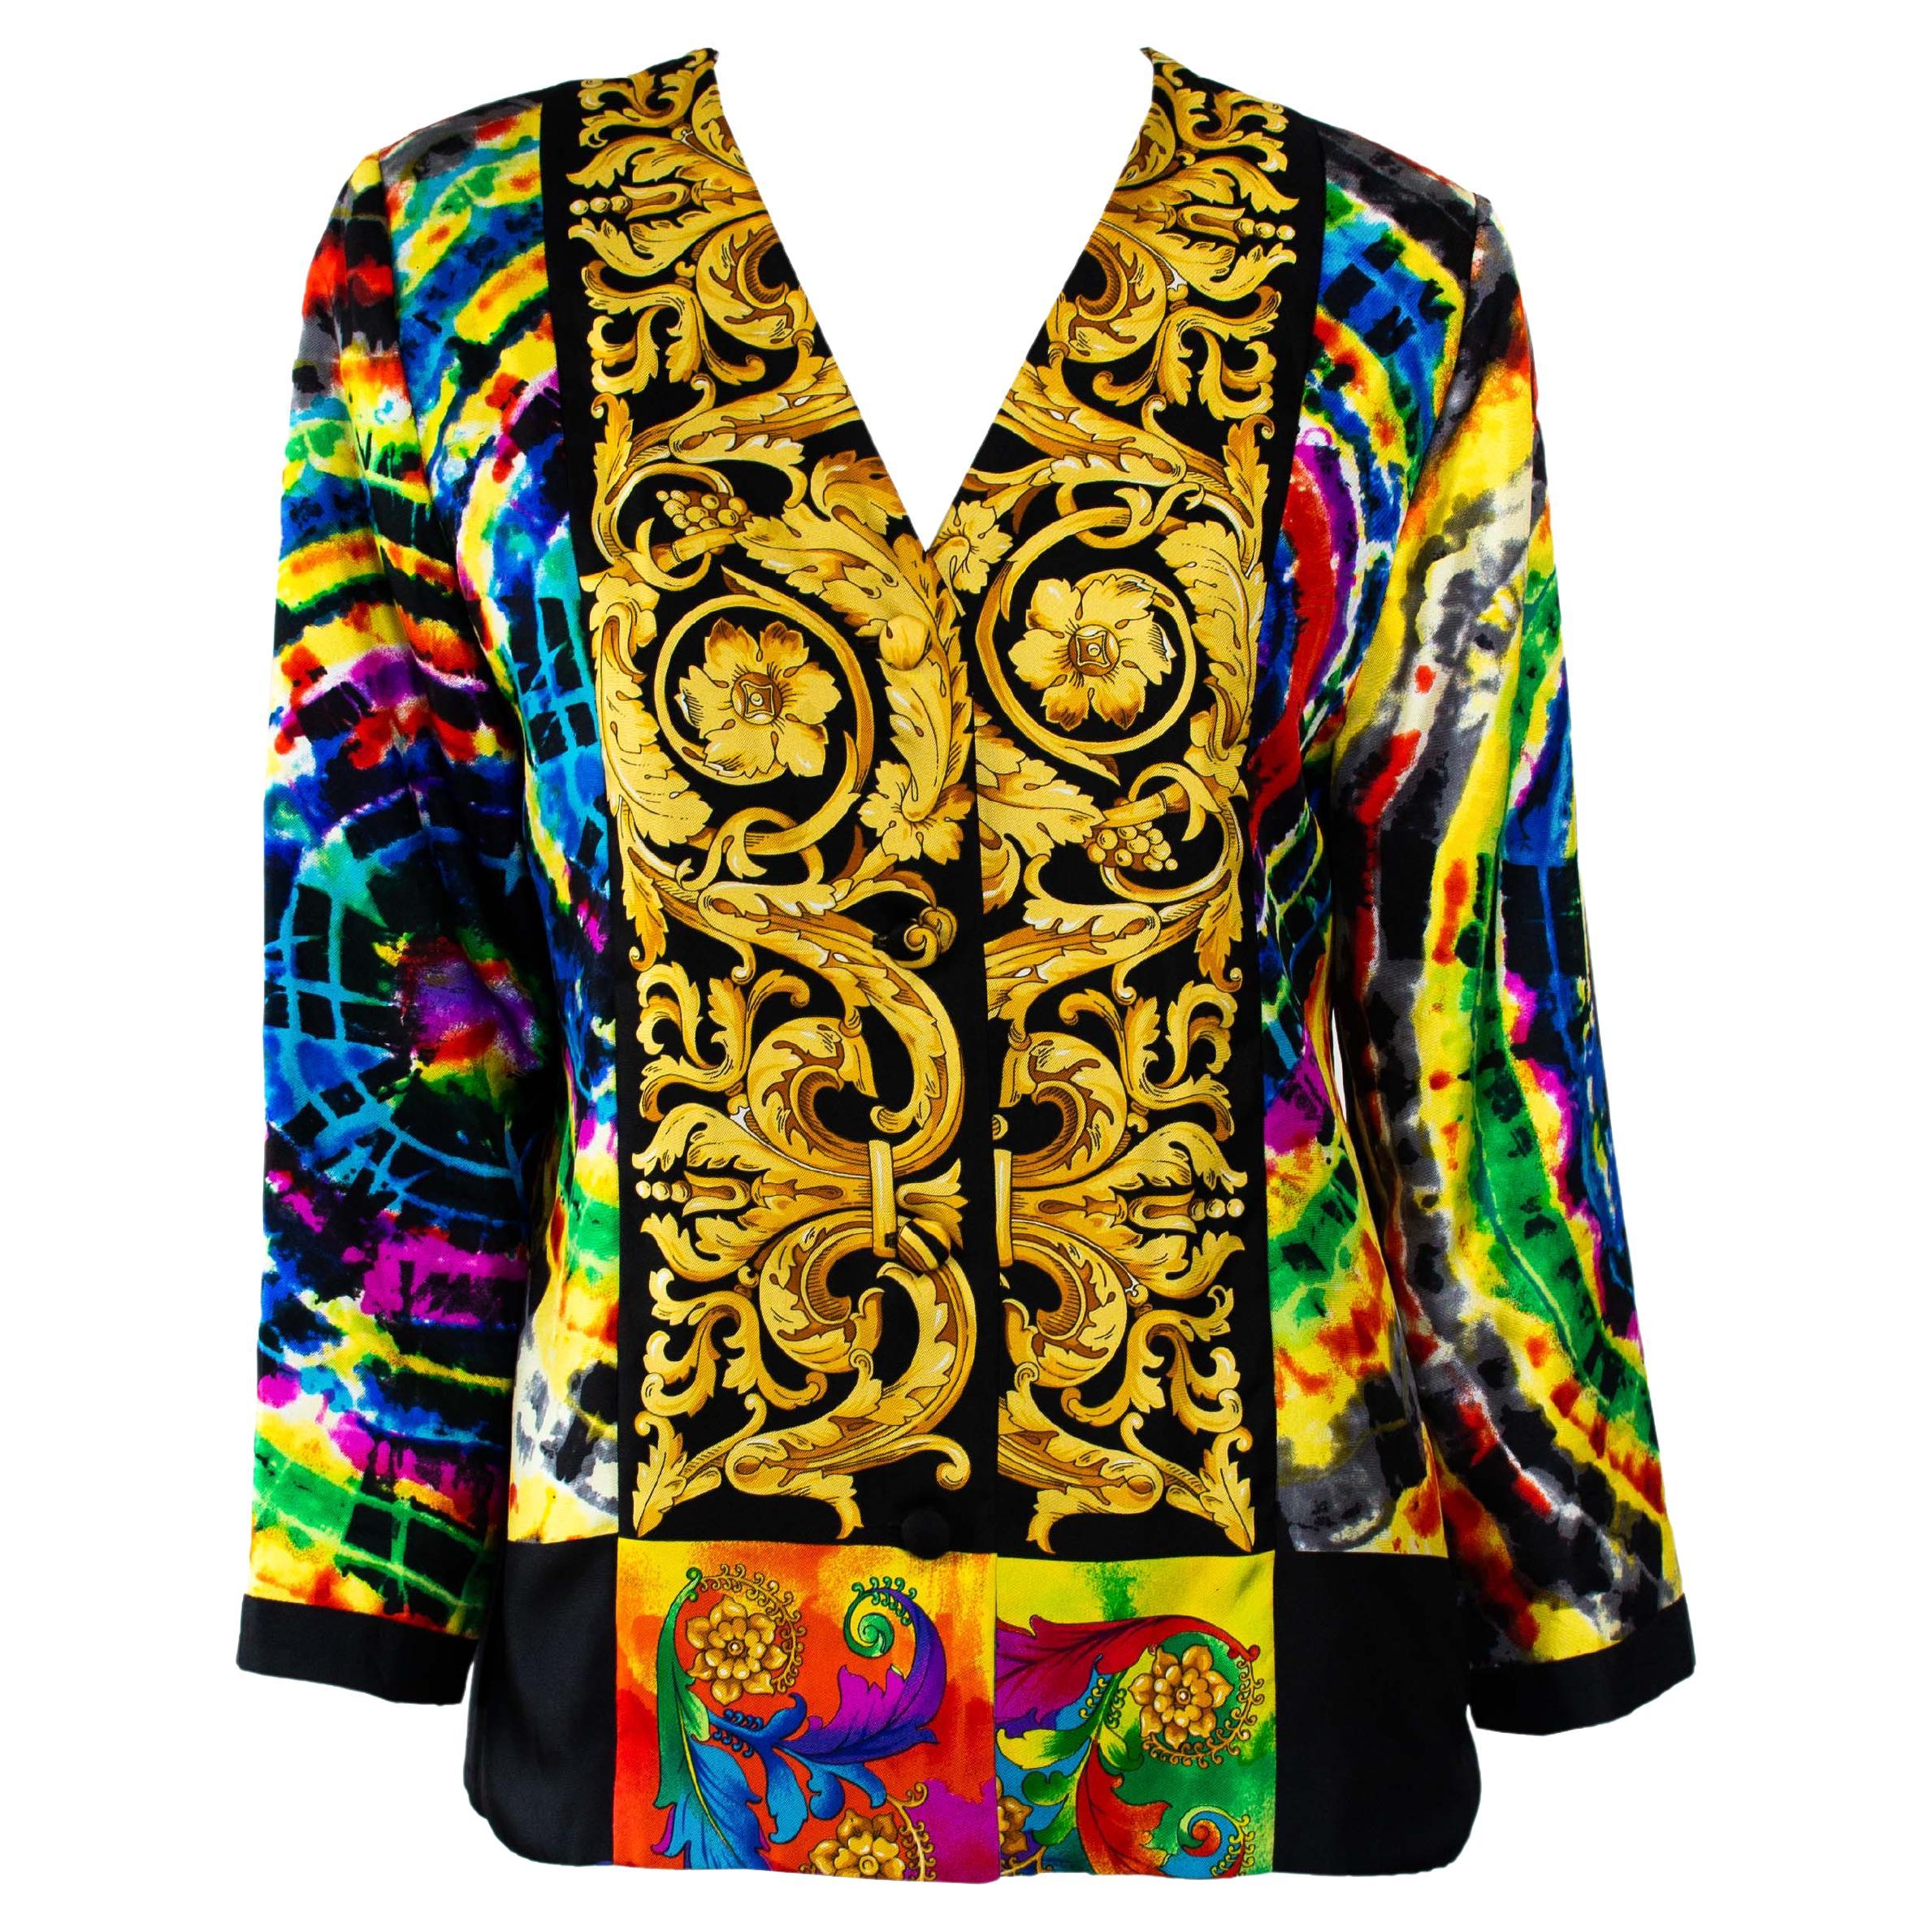 Early 90s Atelier Versace Tie Dye Baroque Silk Evening Jacket by Gianni Versace For Sale